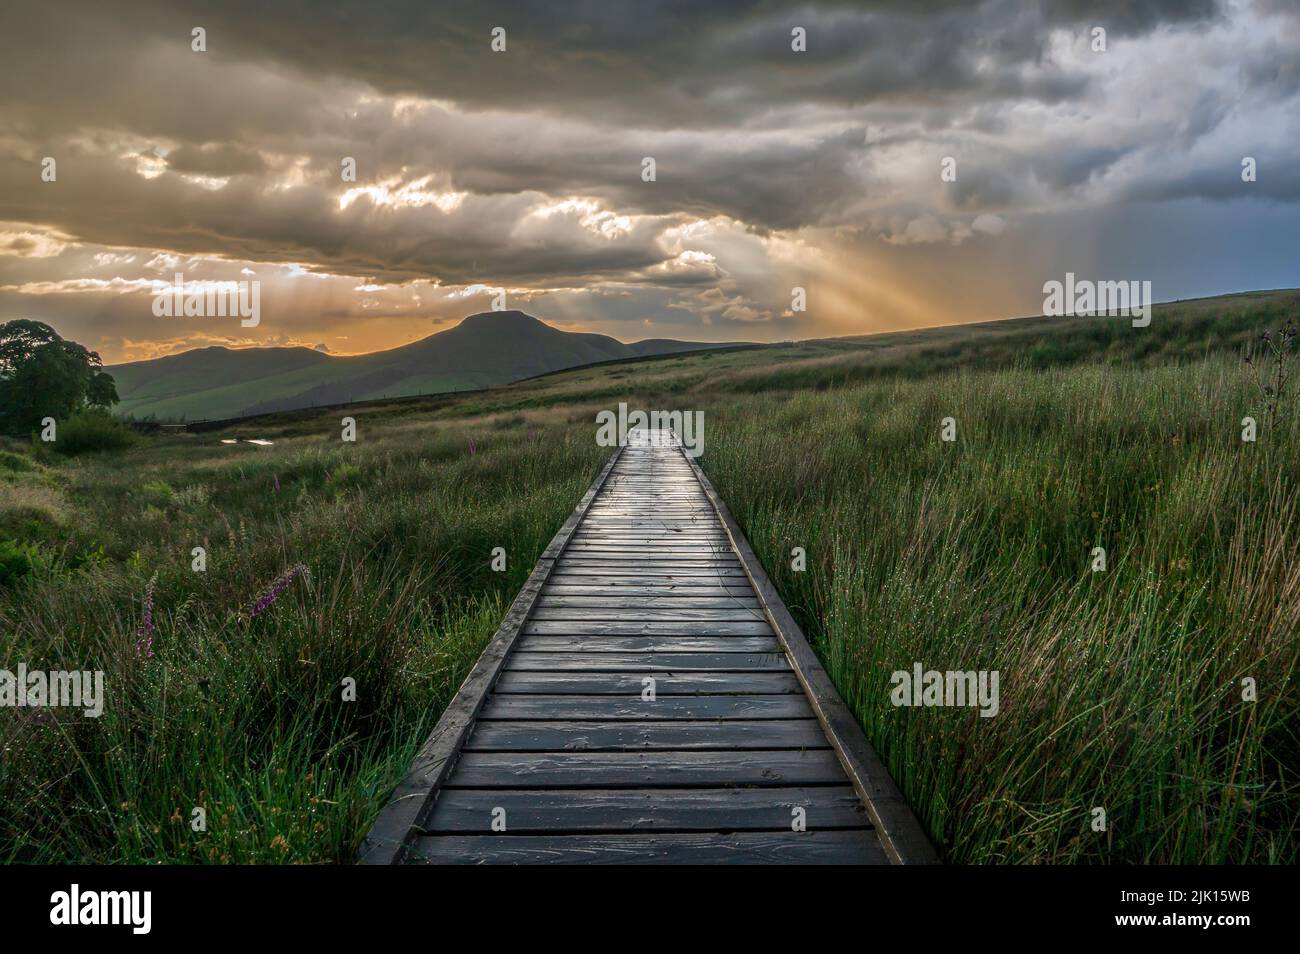 Wooden boardwalk in The Peak District with dramatic sky, Wildboarclough, Cheshire, England, United Kingdom, Europe Stock Photo